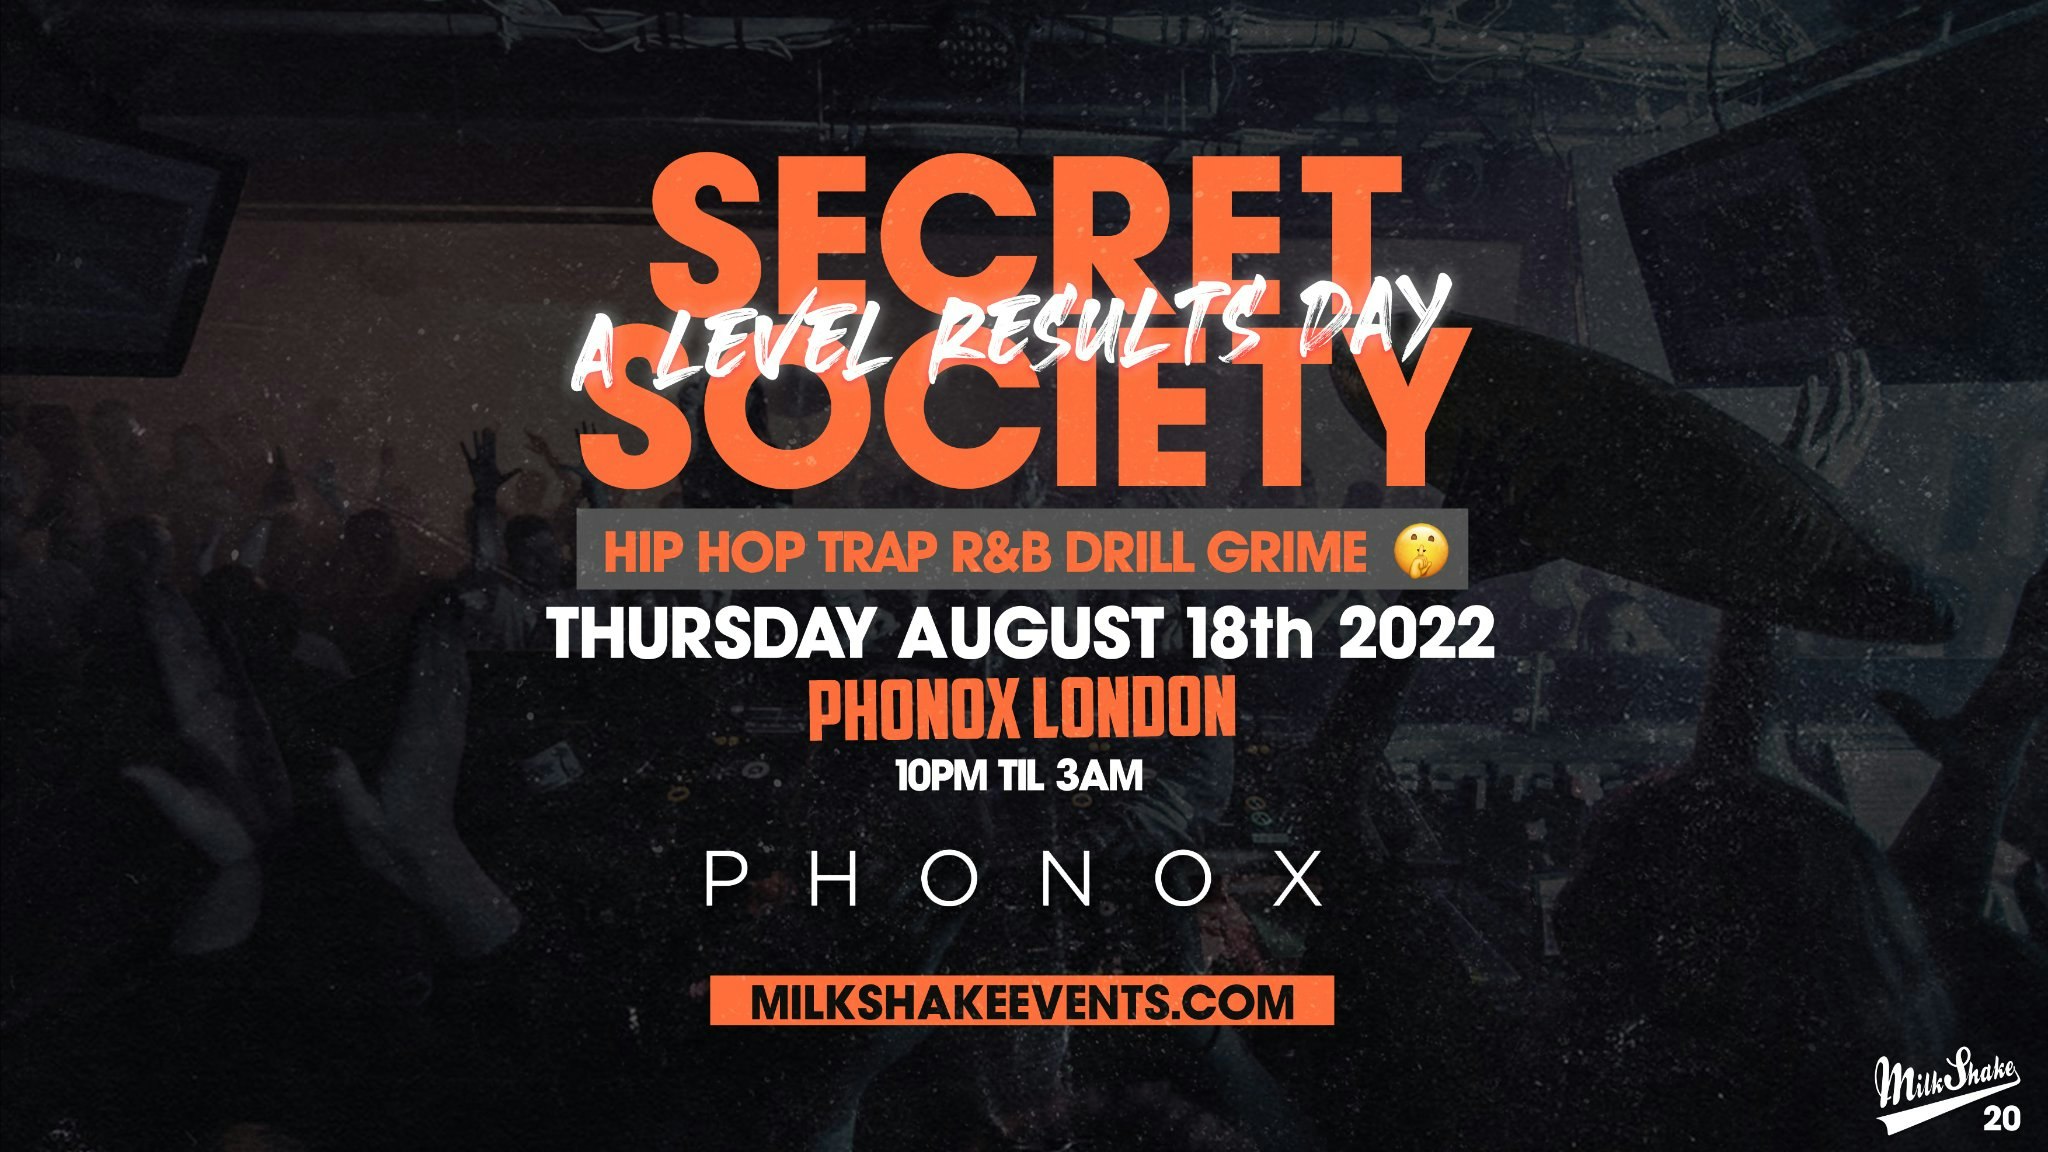 Secret Society – A Level Results Day Rave at Phonox London 🔥